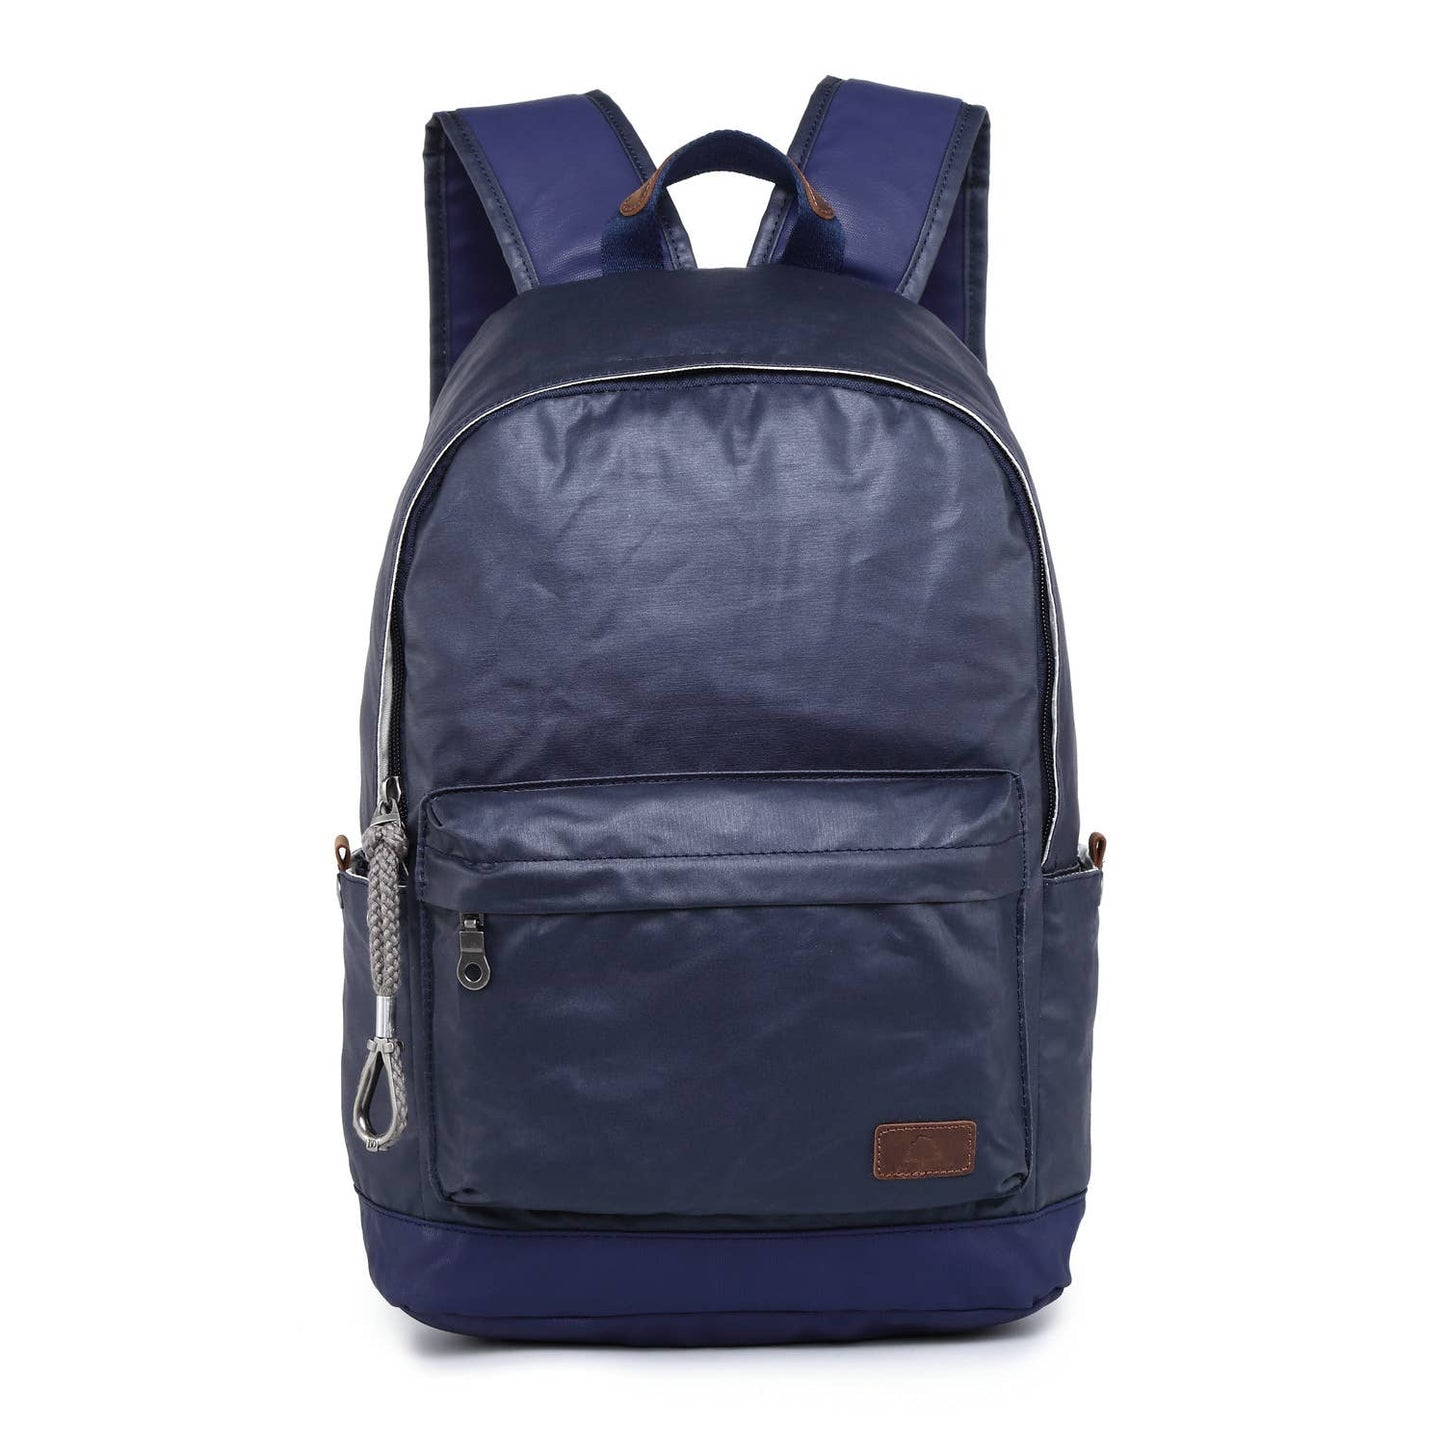 Urban Light Leather Backpack - Navy